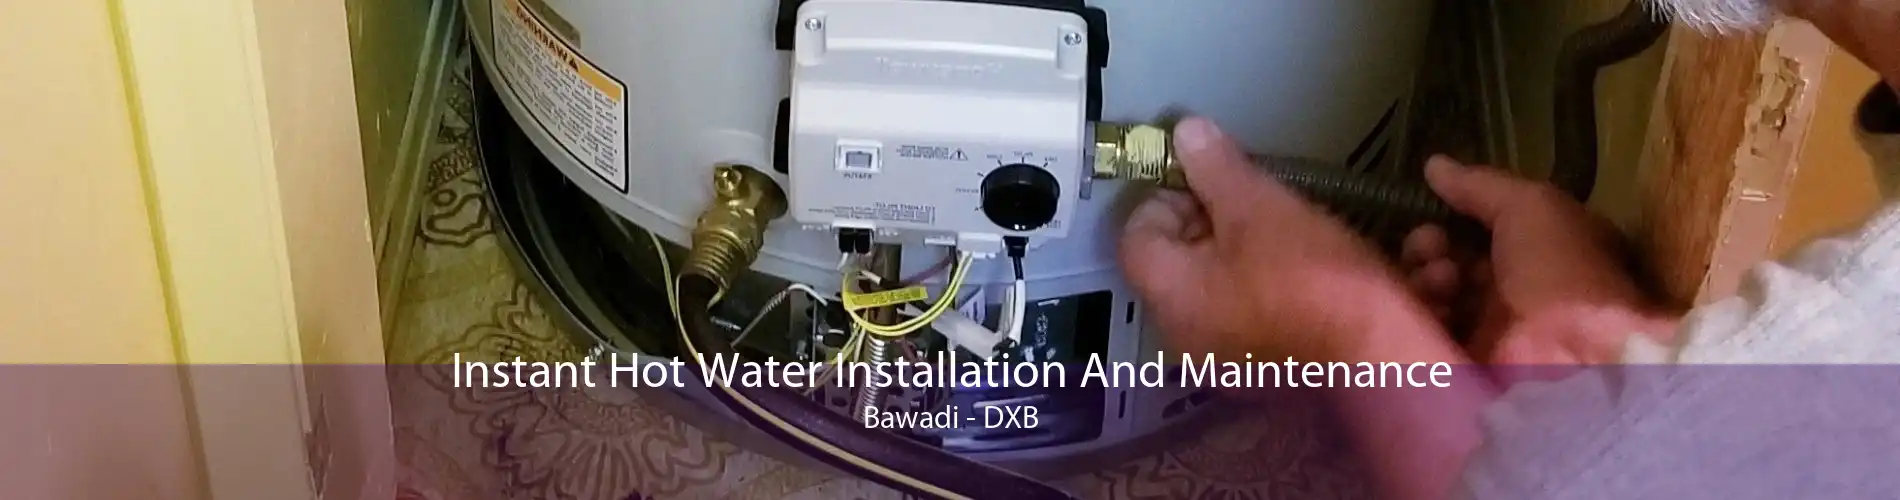 Instant Hot Water Installation And Maintenance Bawadi - DXB